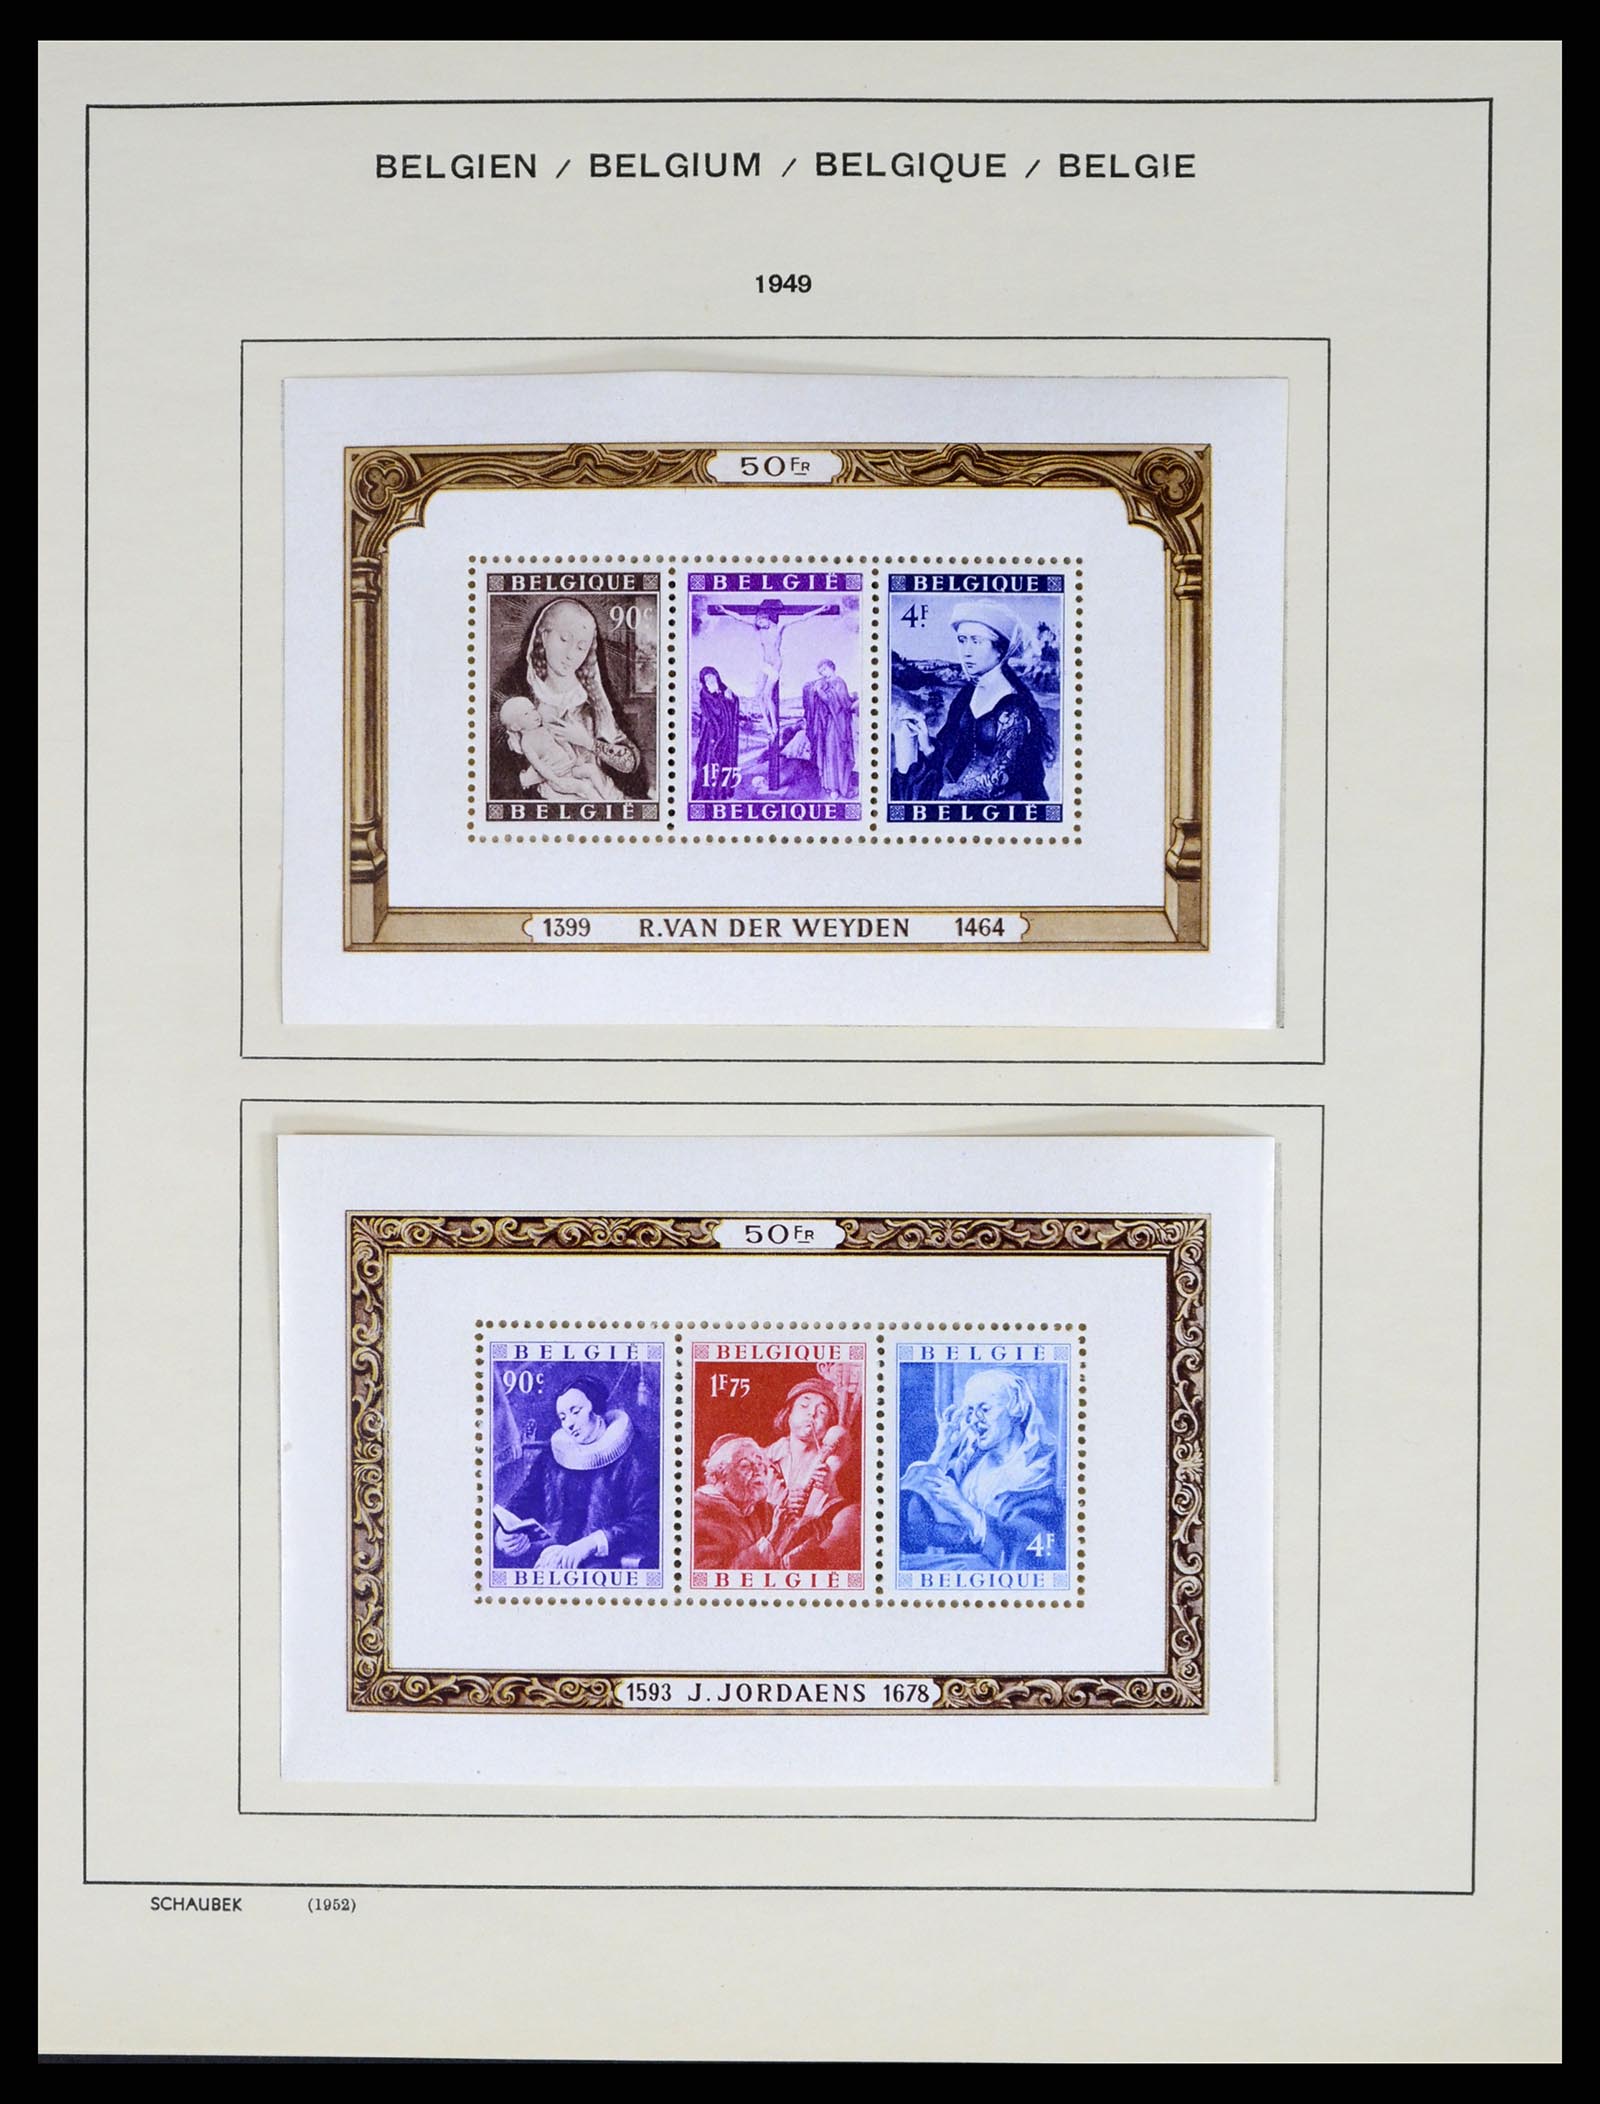 37595 072 - Stamp collection 37595 Super collection Belgium 1849-2015!